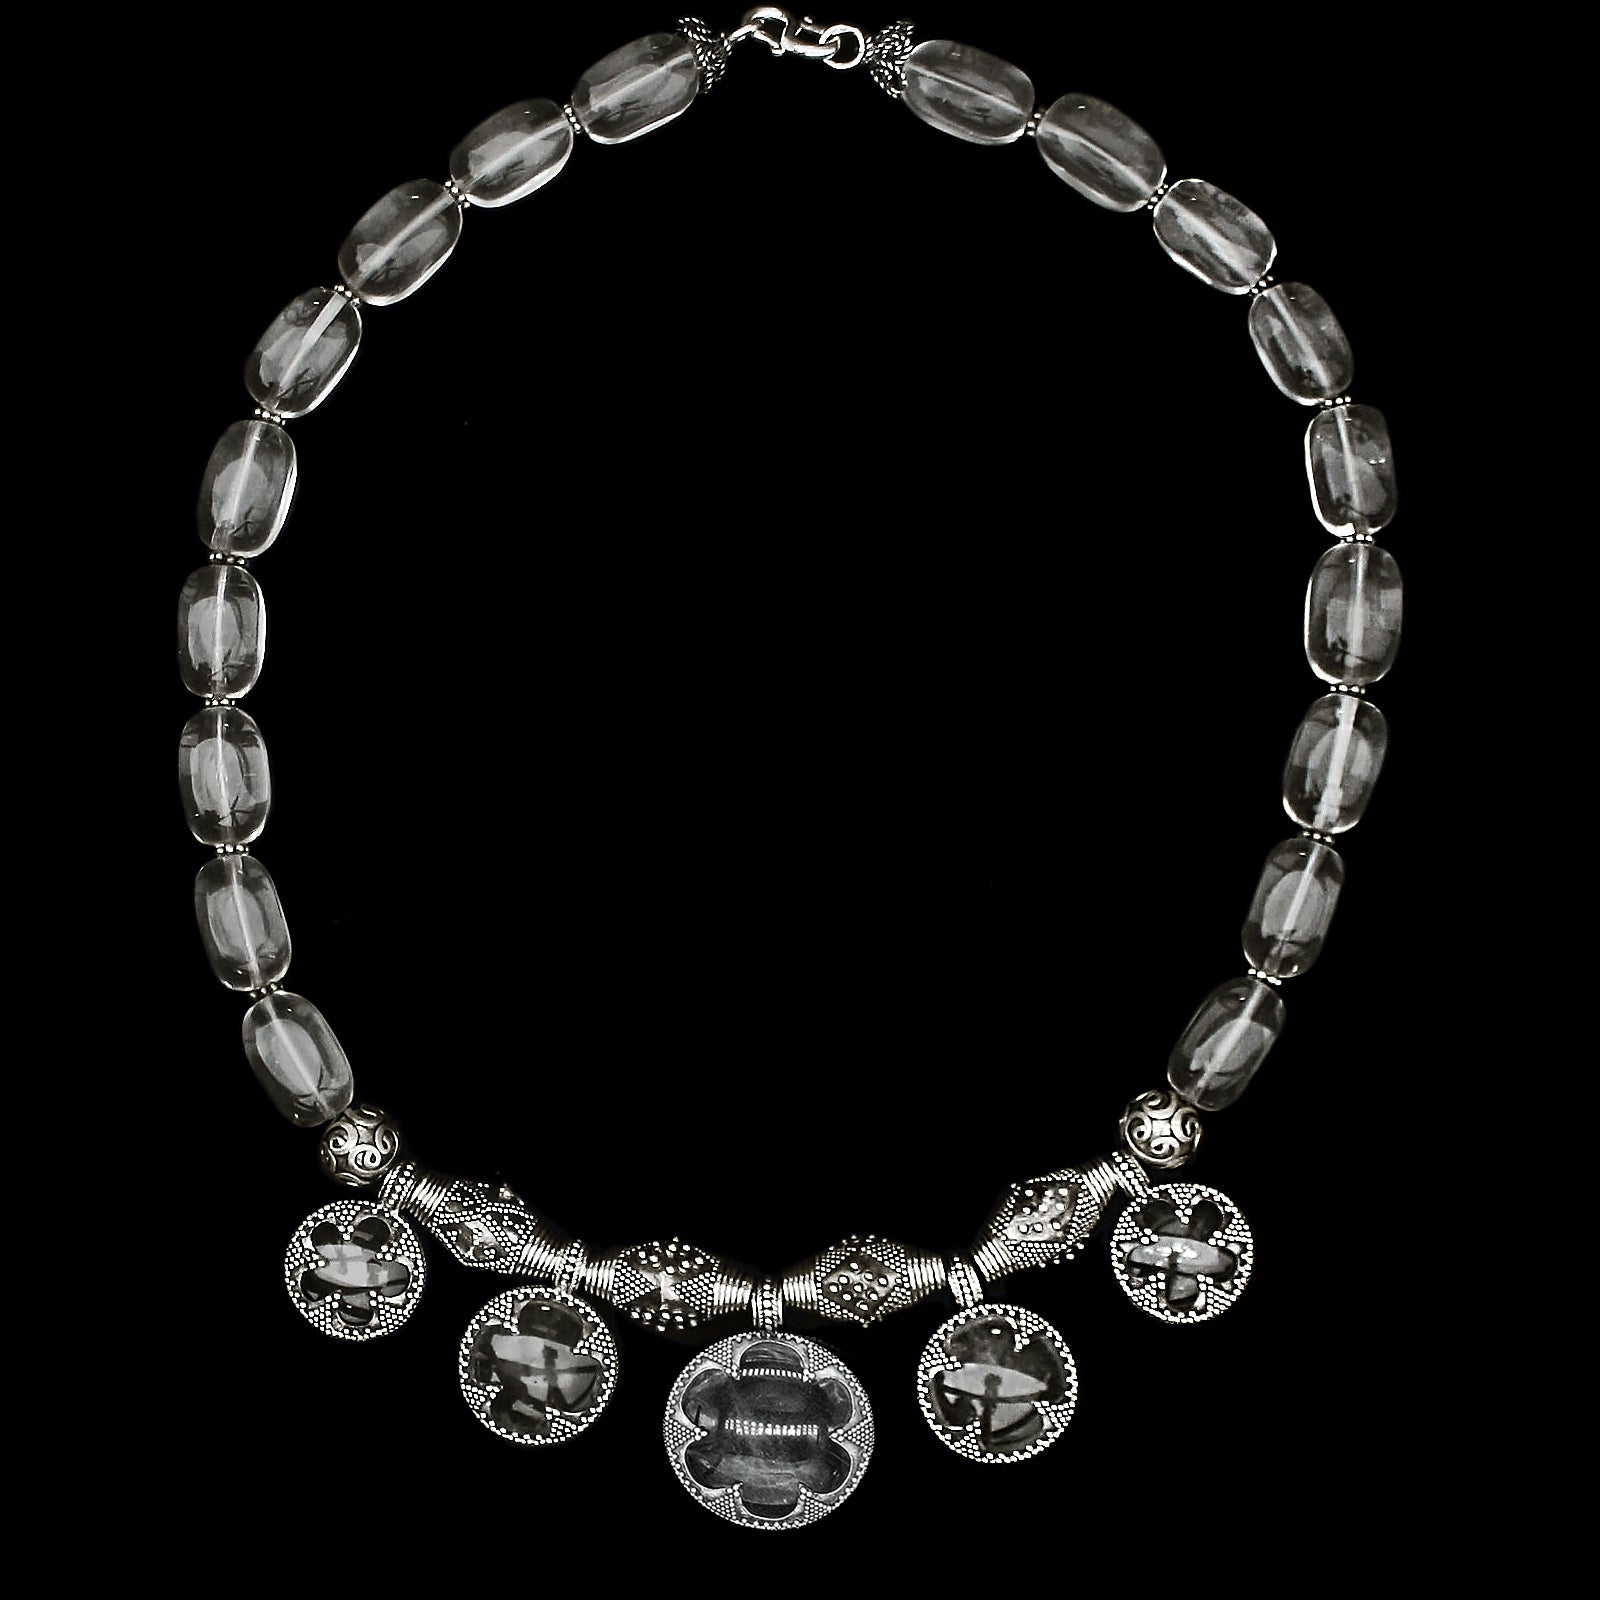 5 Lens Rock Crystal & Silver Necklace from Gotland